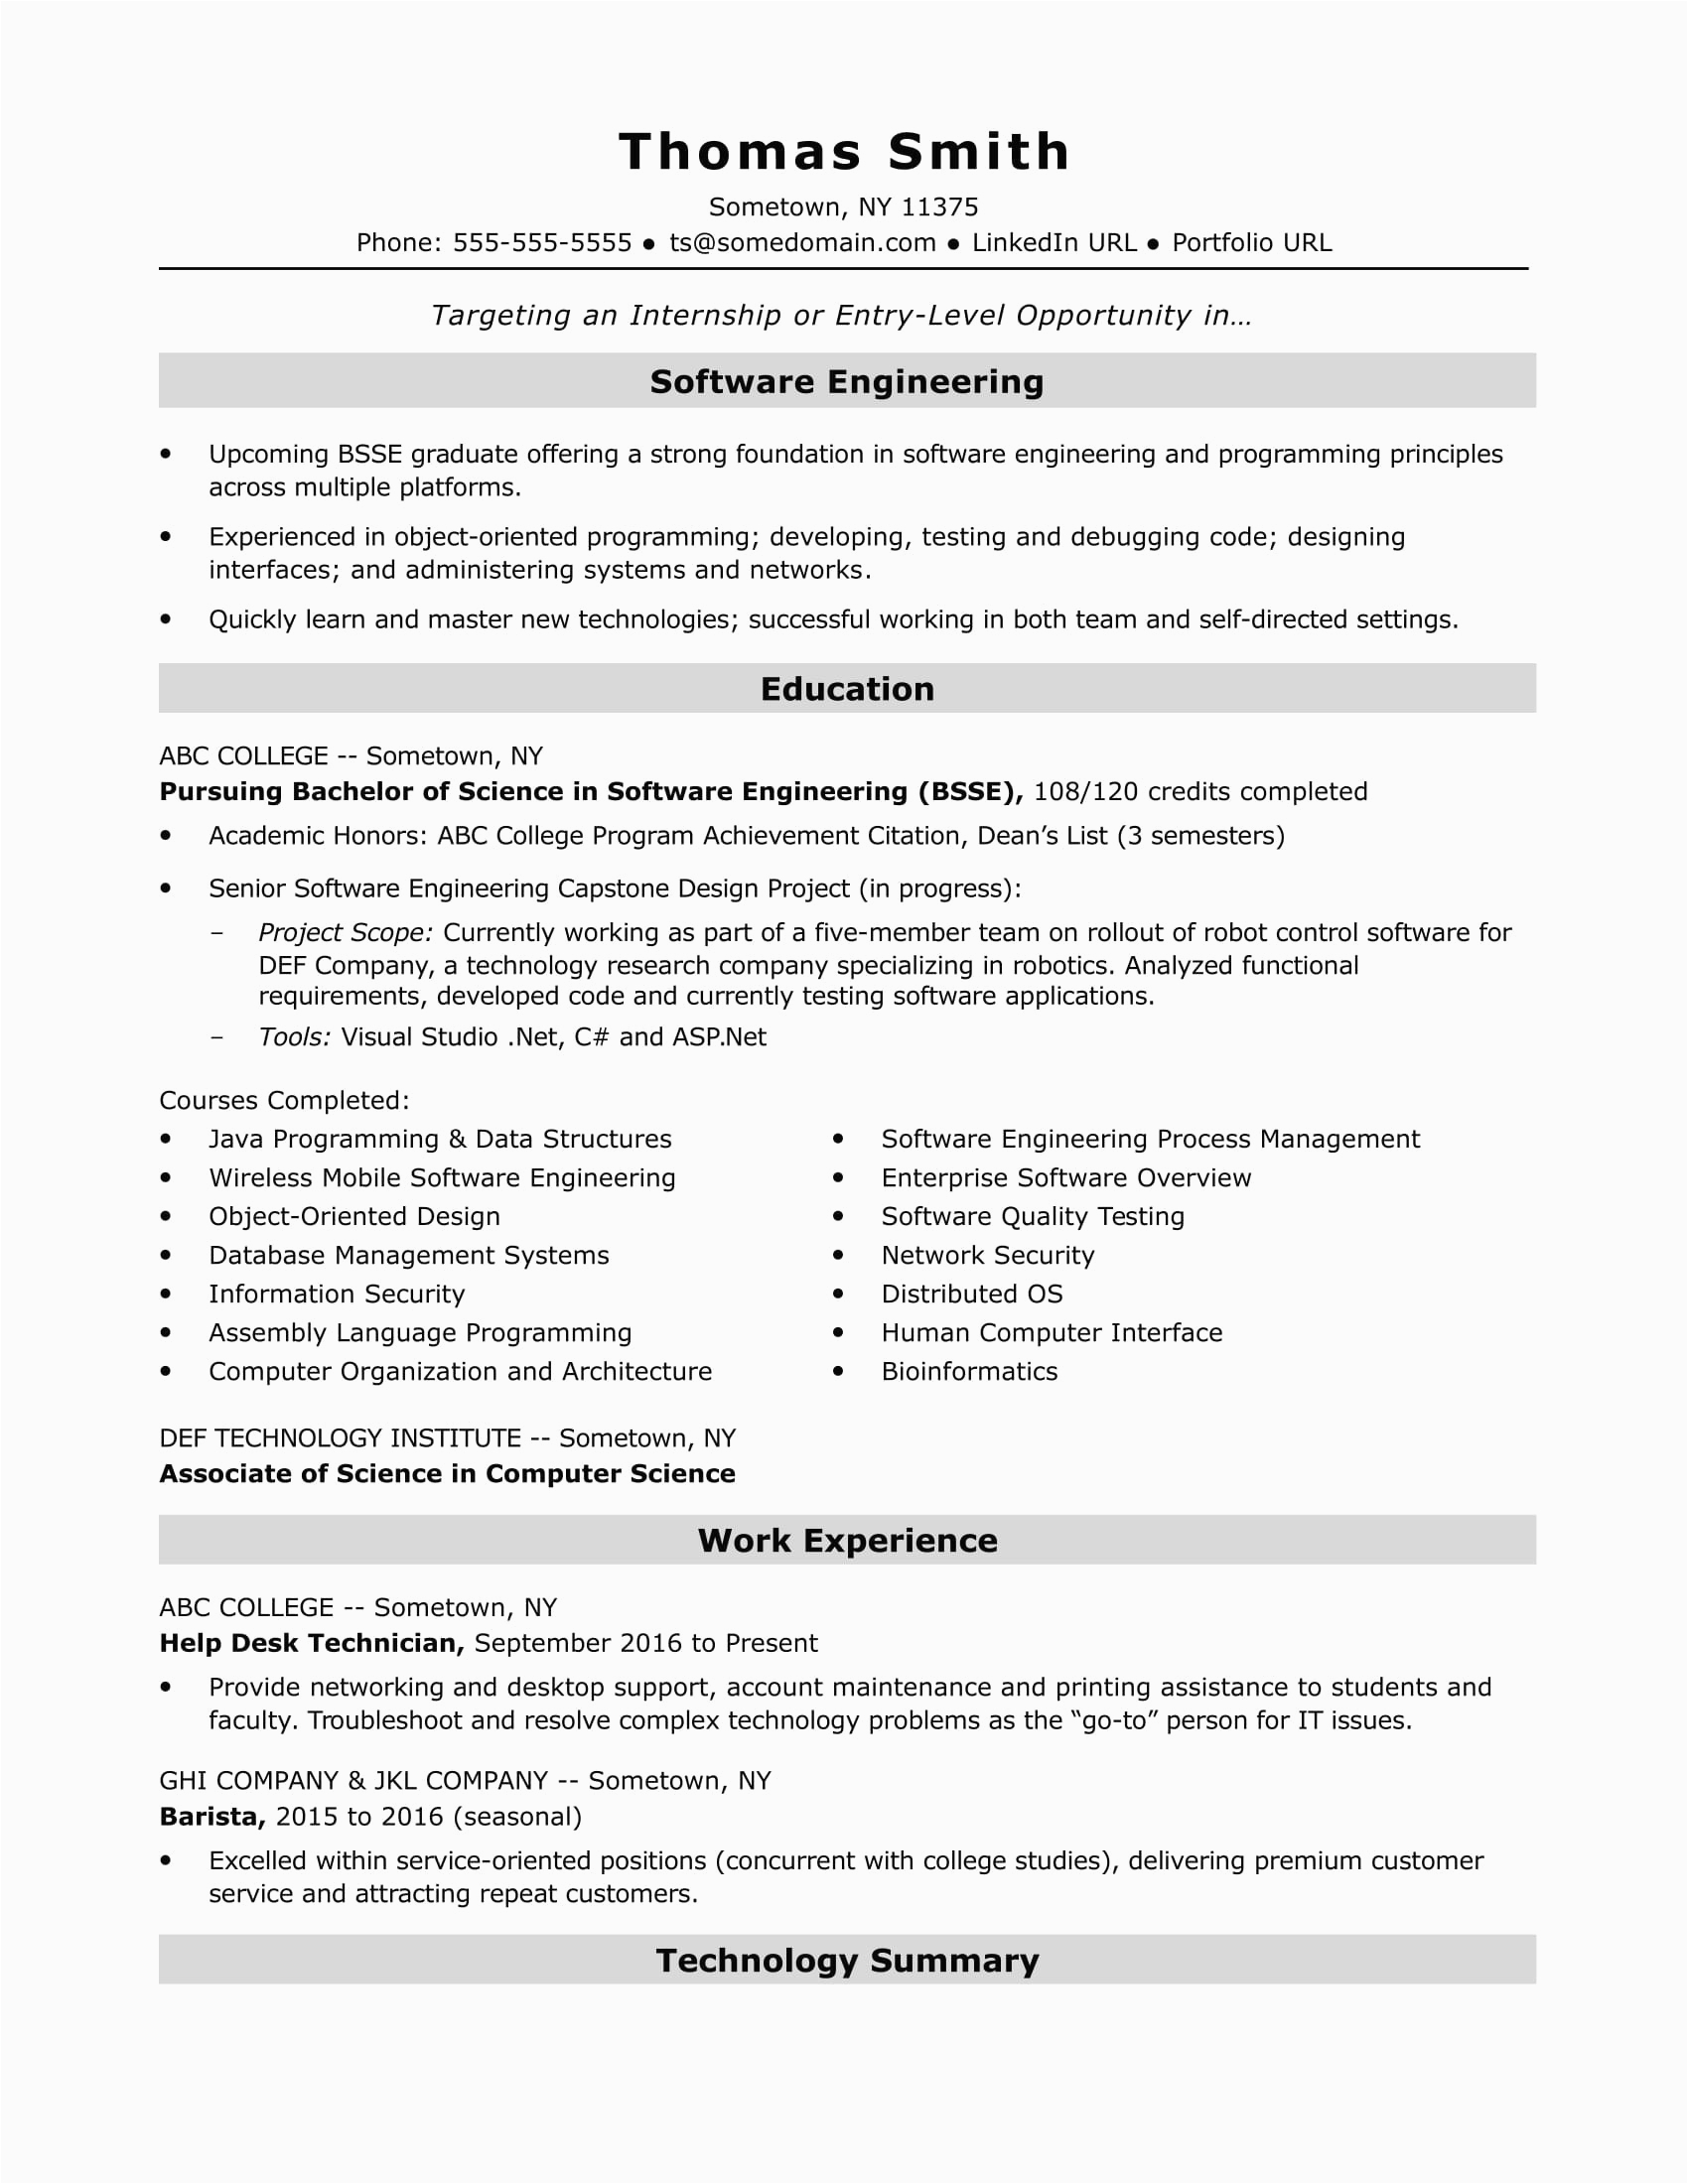 Professional Resume Samples for software Engineers software Engineer Resume No Experience